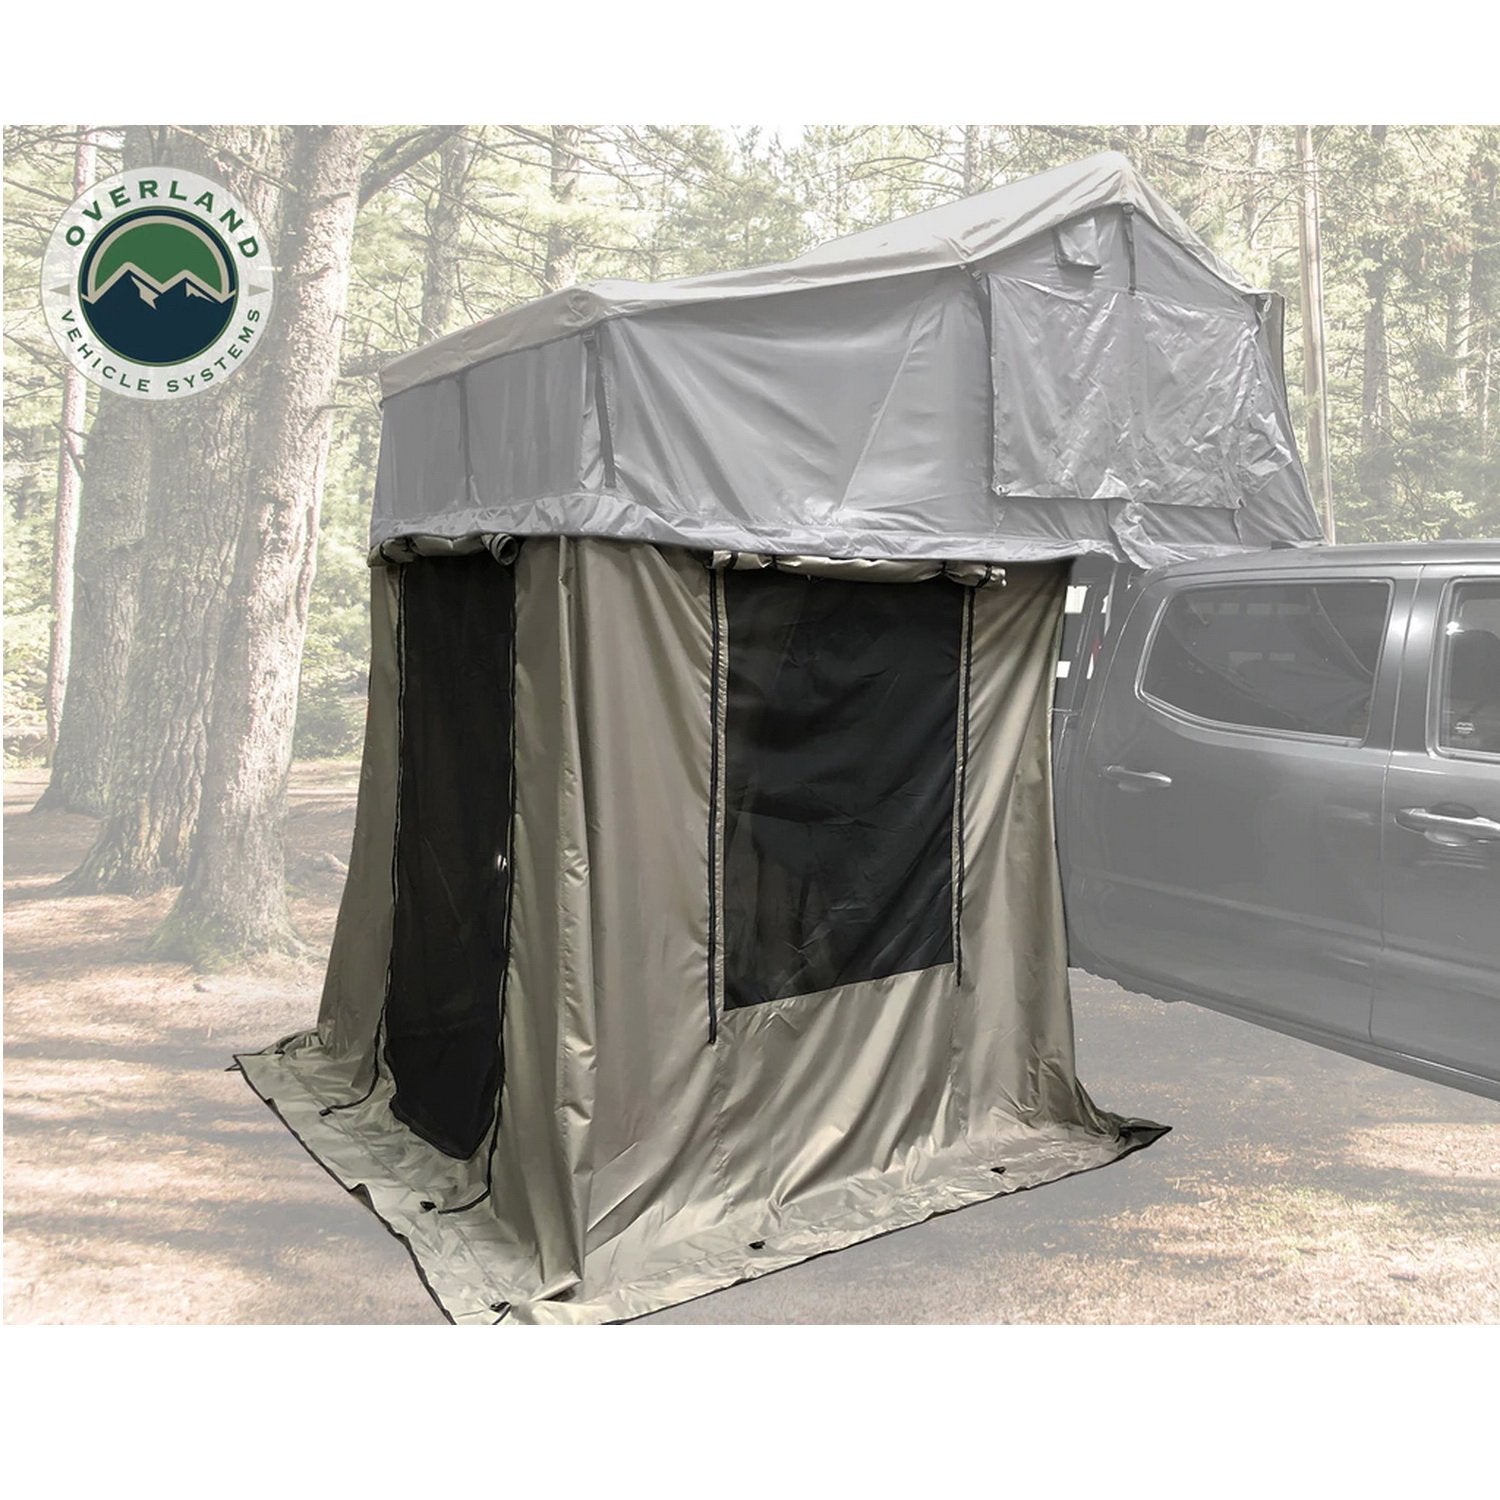 Overland Vehicle Systems Nomadic 3 Annex - Green - Tent Annex - Anytime Overland